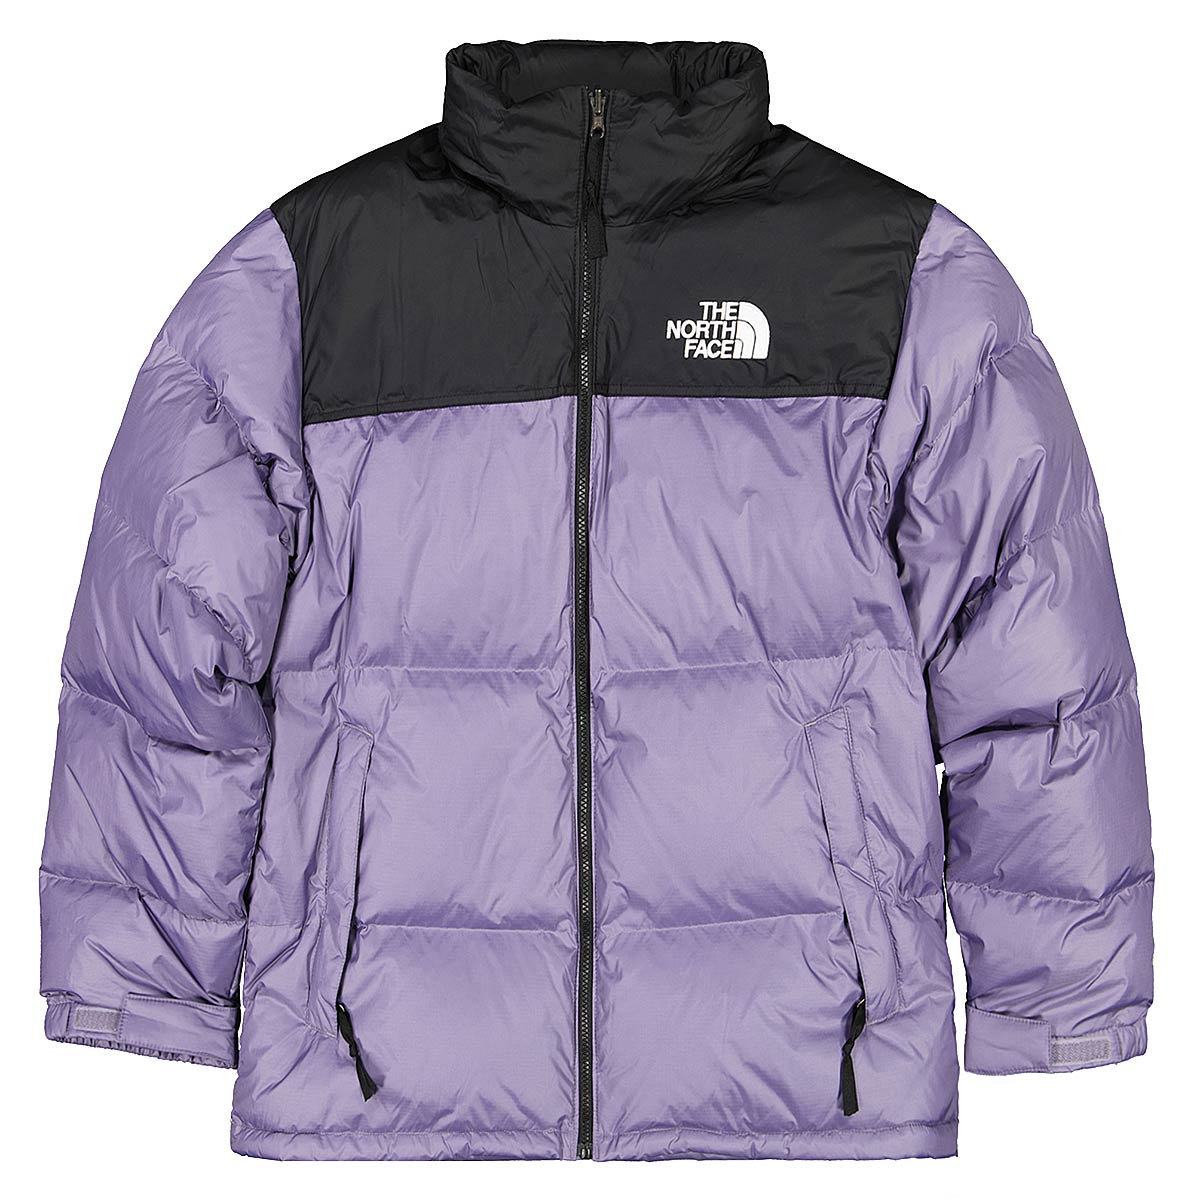 🏀 Get the The North Face 1996 RETRO NUPTSE Jacket in Lunar Slate-TNF ...